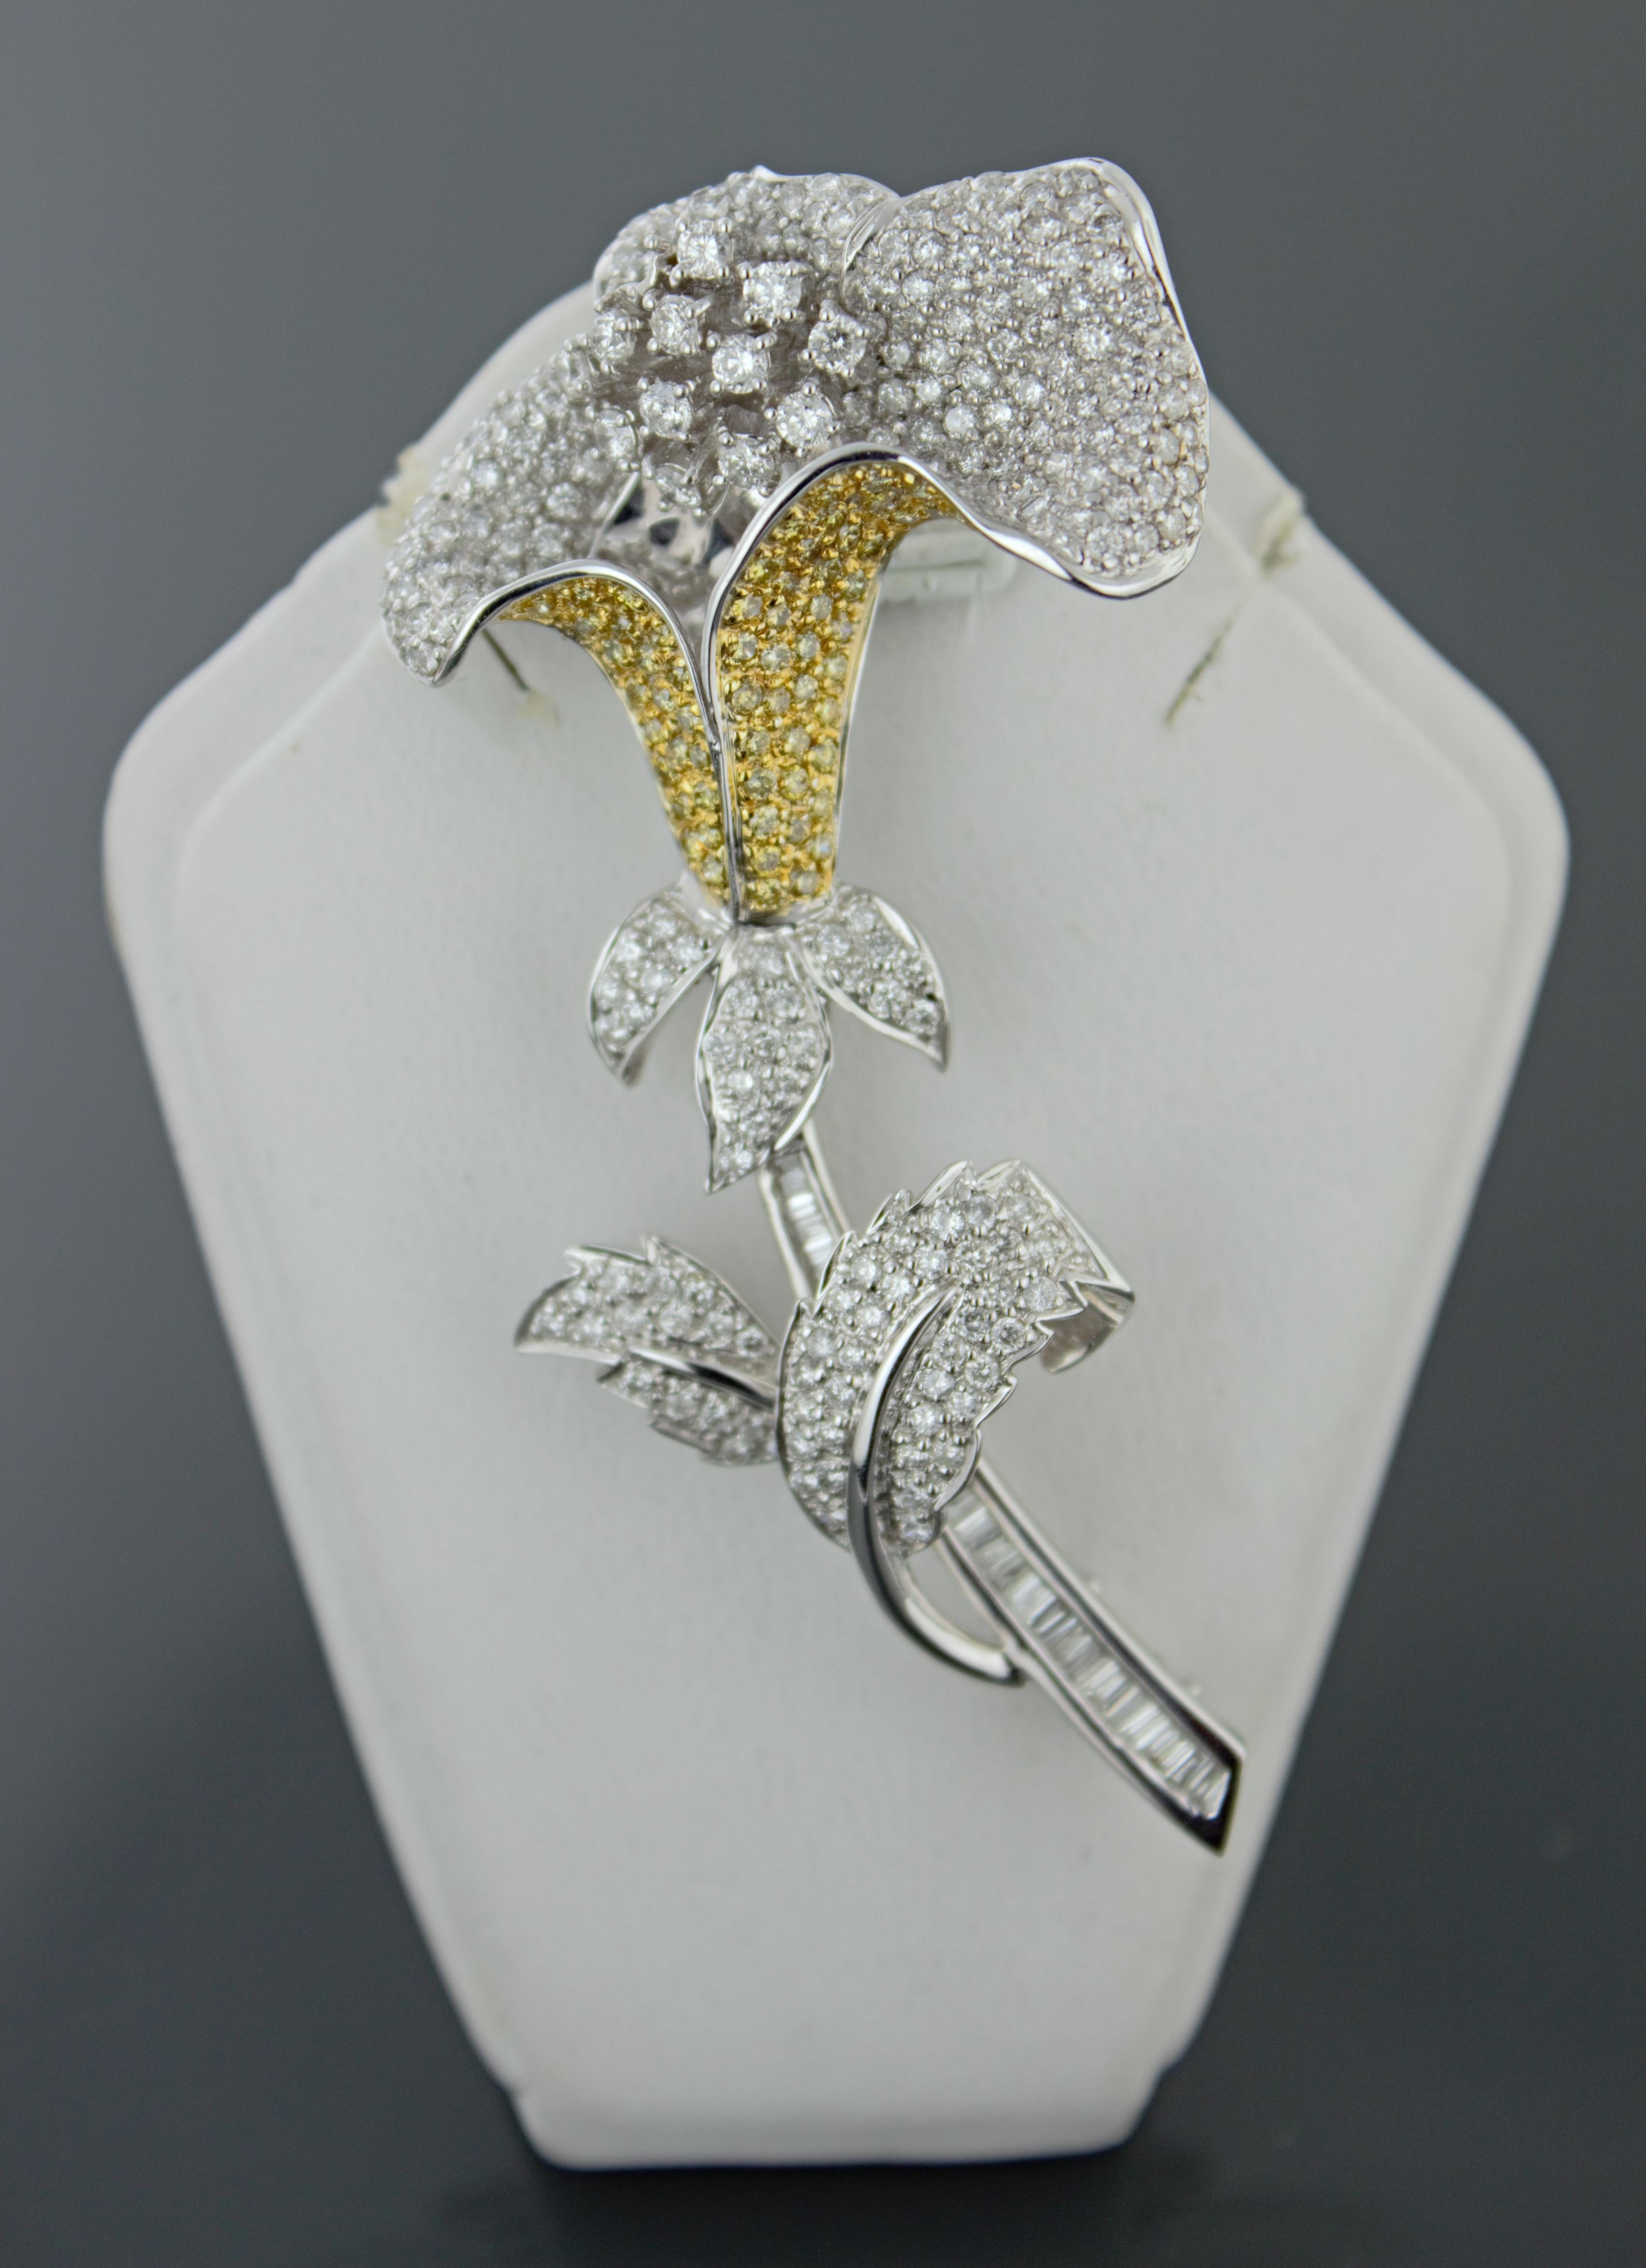 Featuring 239 full-cut, (30) baguette-cut, and 60 treated yellow full-cut diamonds, total diamond
weight is 5.35 carat total weight, I, I-J and yellow, pave and channel set in an 18k white gold sculpted flower
mounting, 65mm x 32.2mm x 13mm, marked